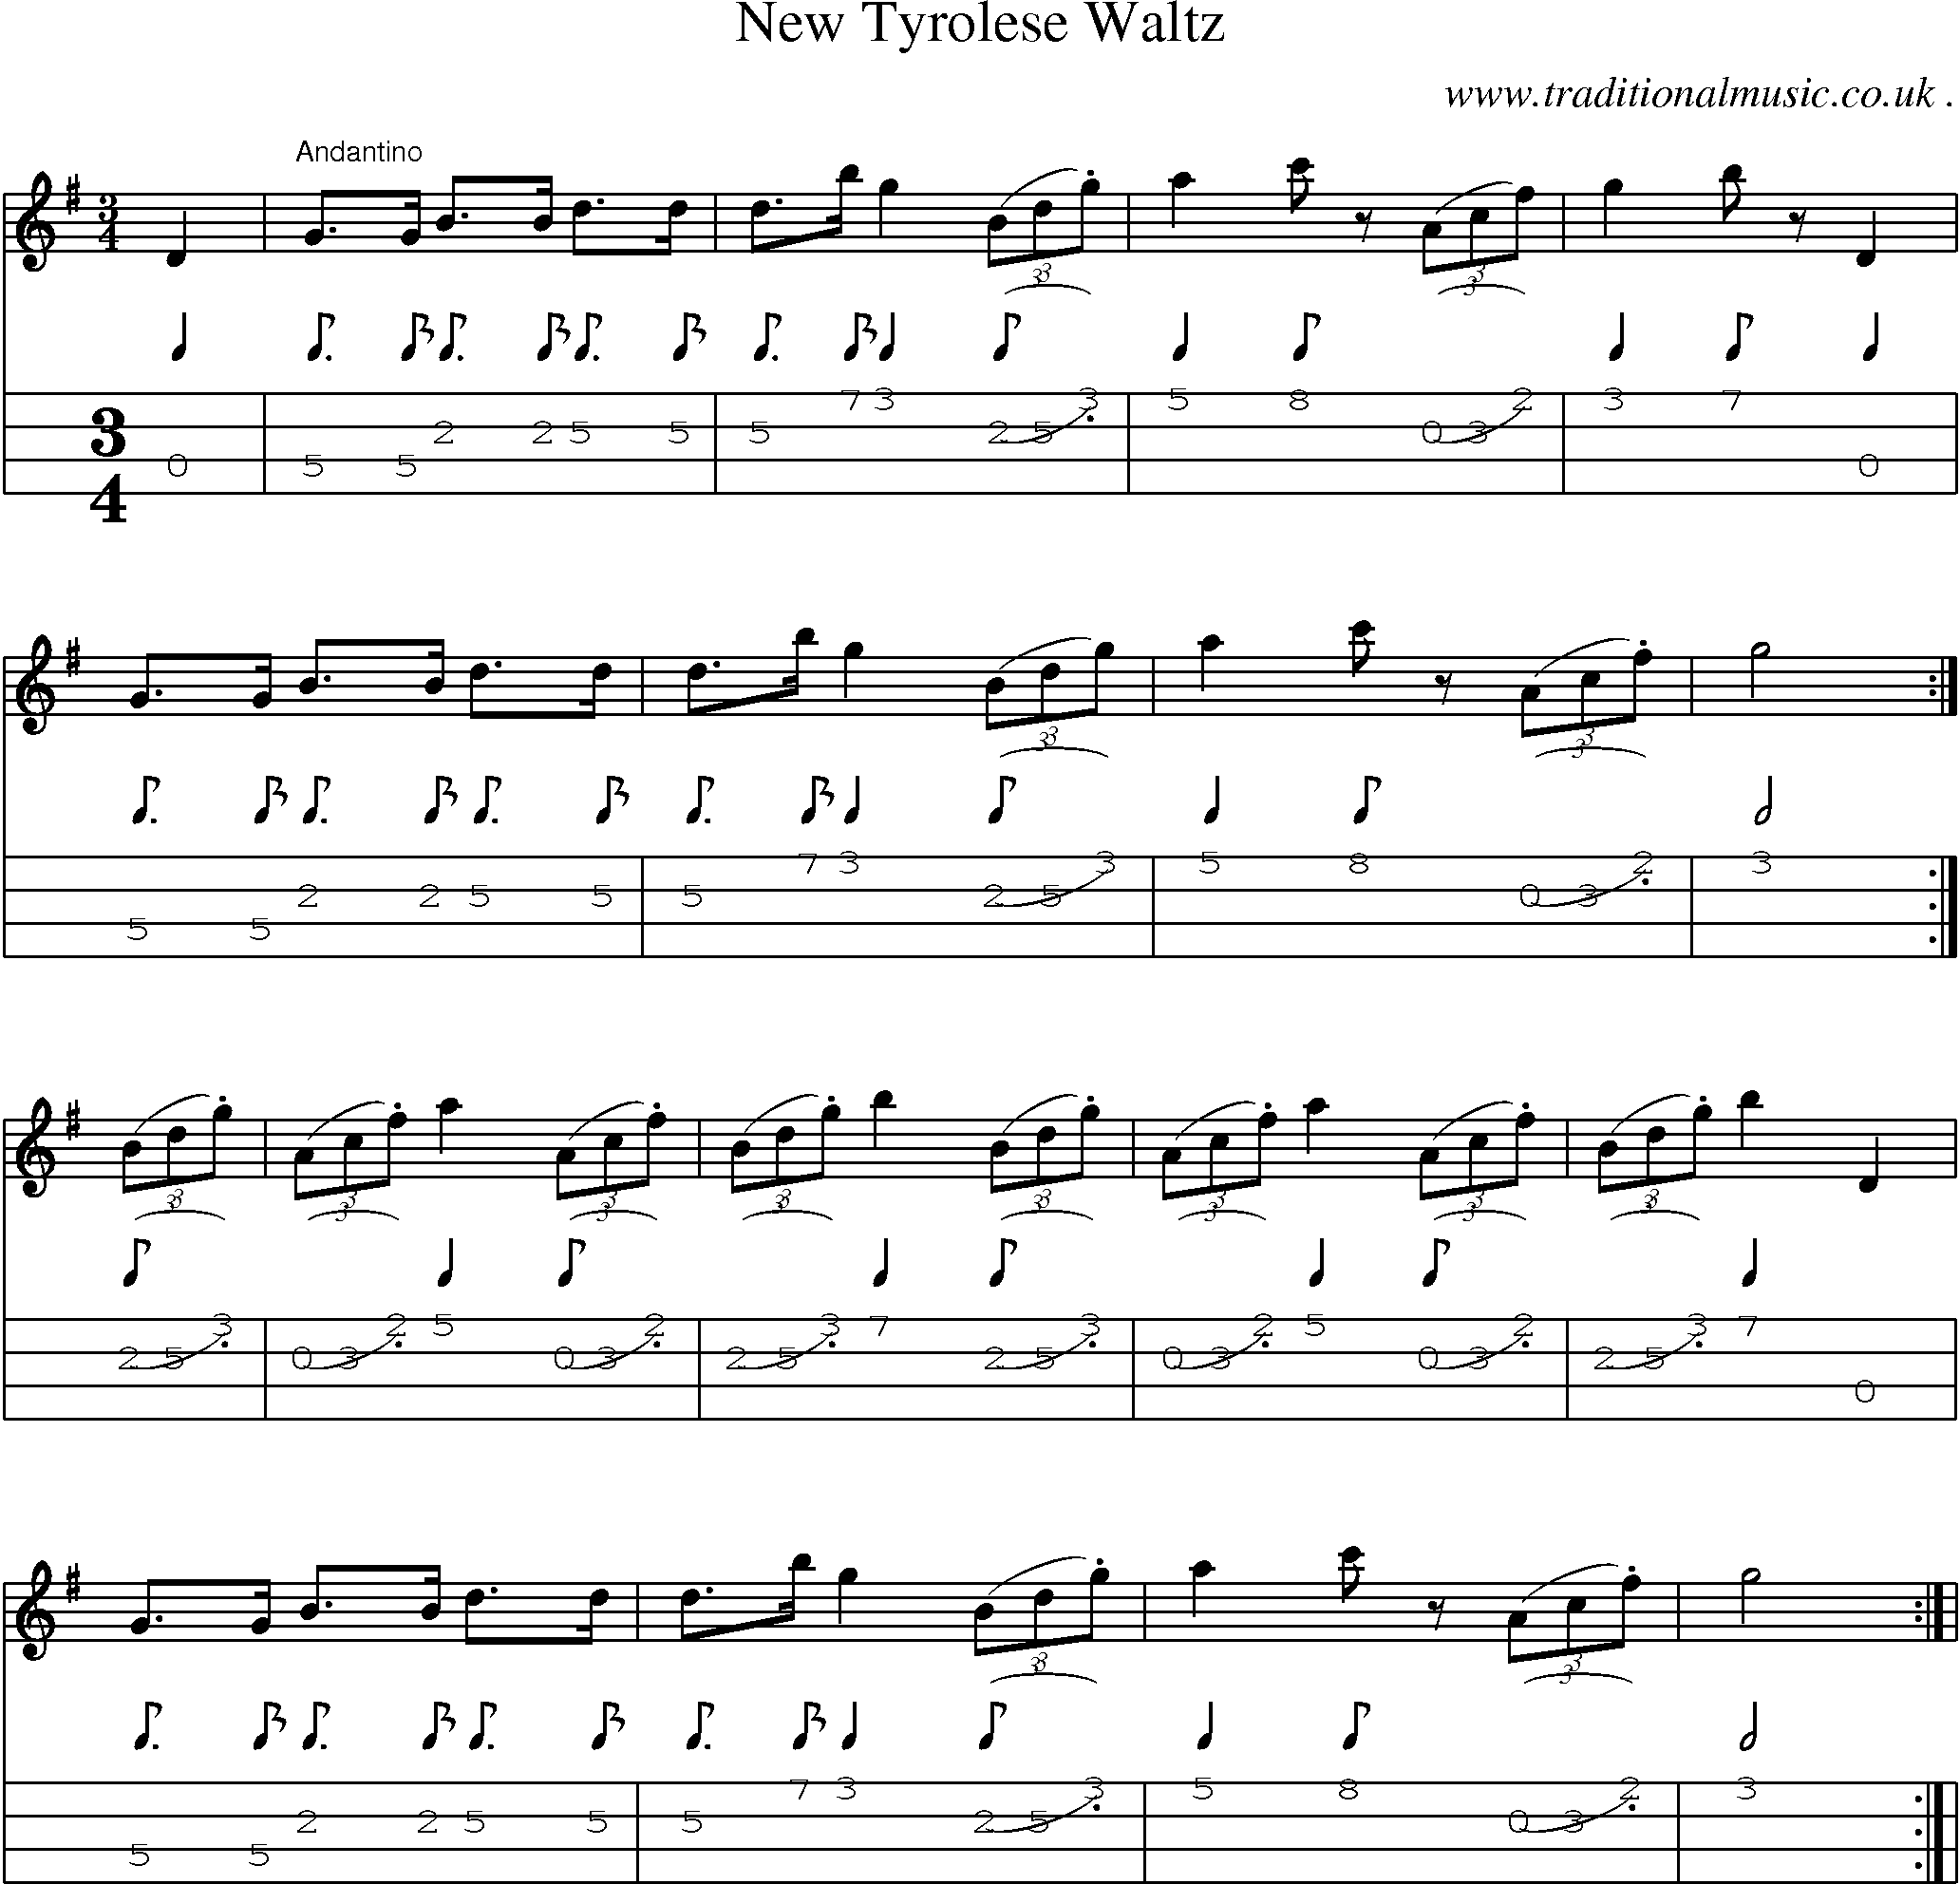 Sheet-Music and Mandolin Tabs for New Tyrolese Waltz